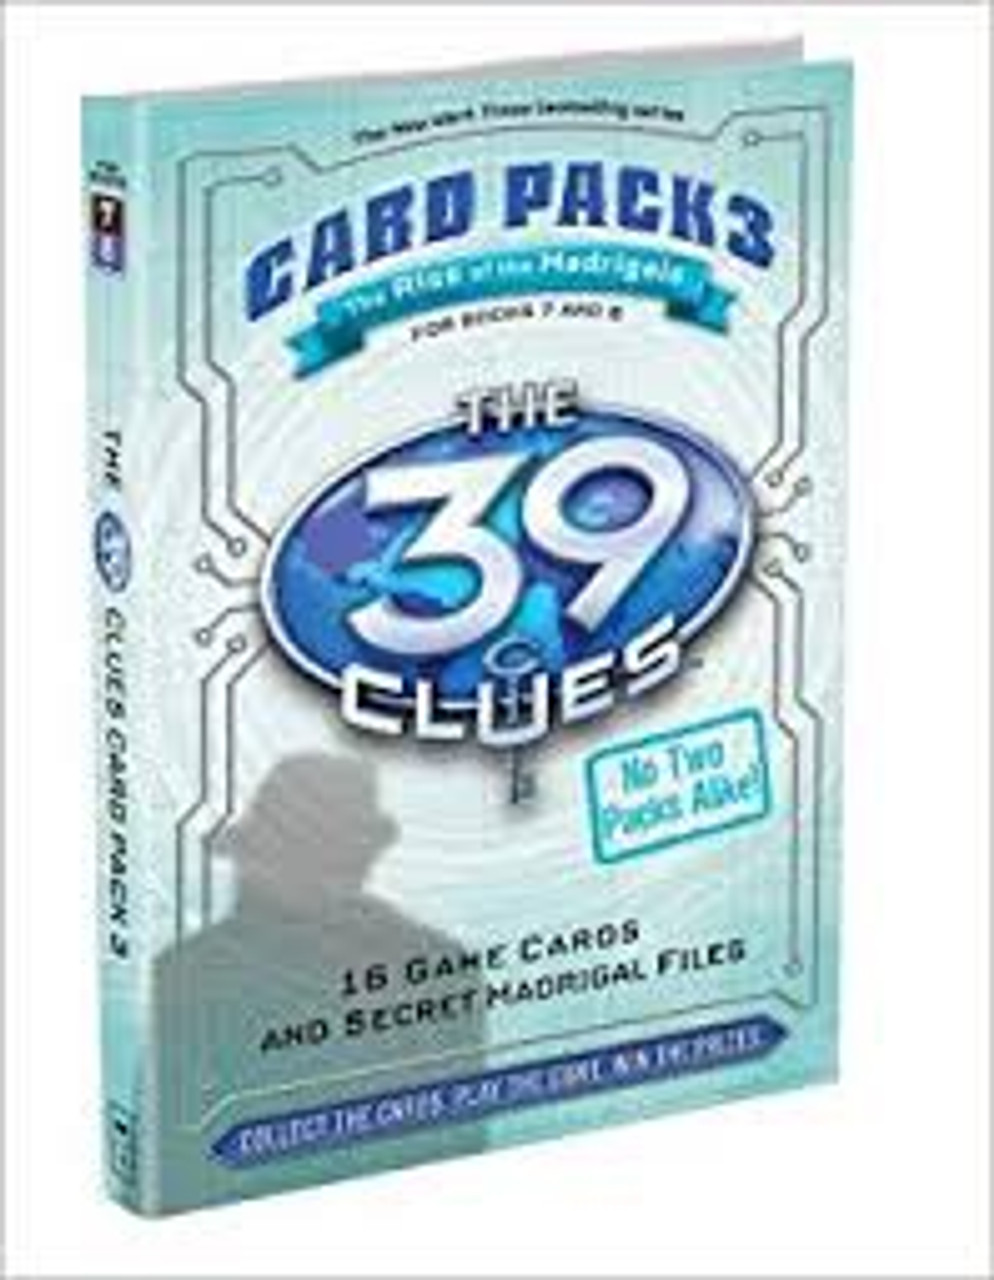 THE 39 CLUES CARD PACK 3